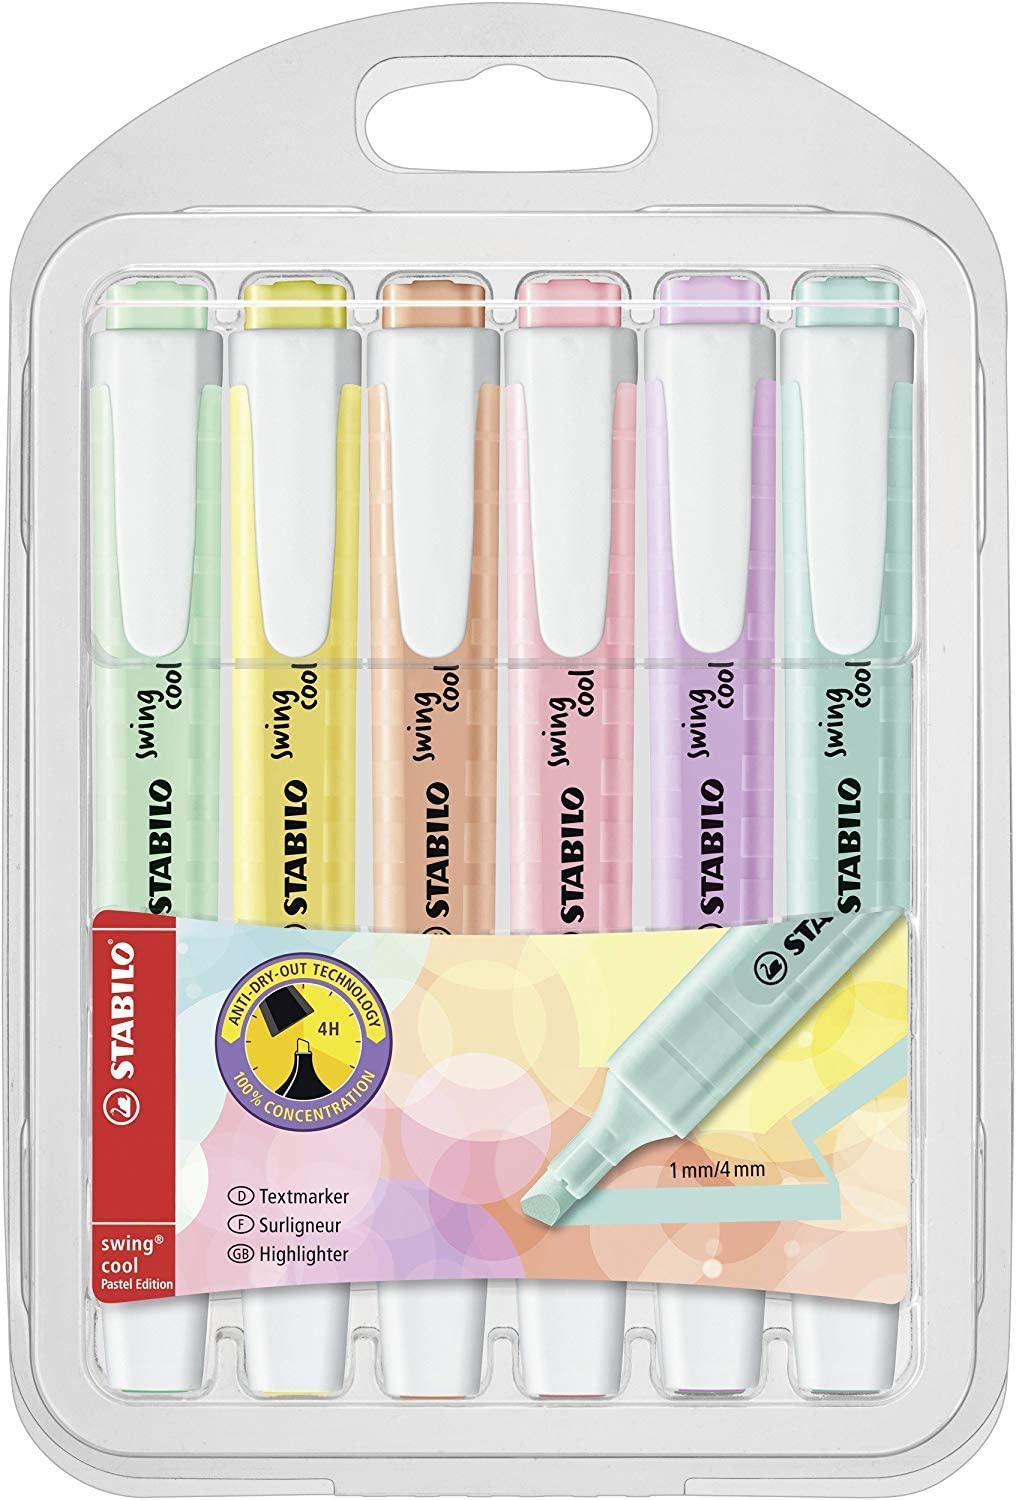 STABILO Pocket-Sized Slanted Tip Highlighters, 6-Count